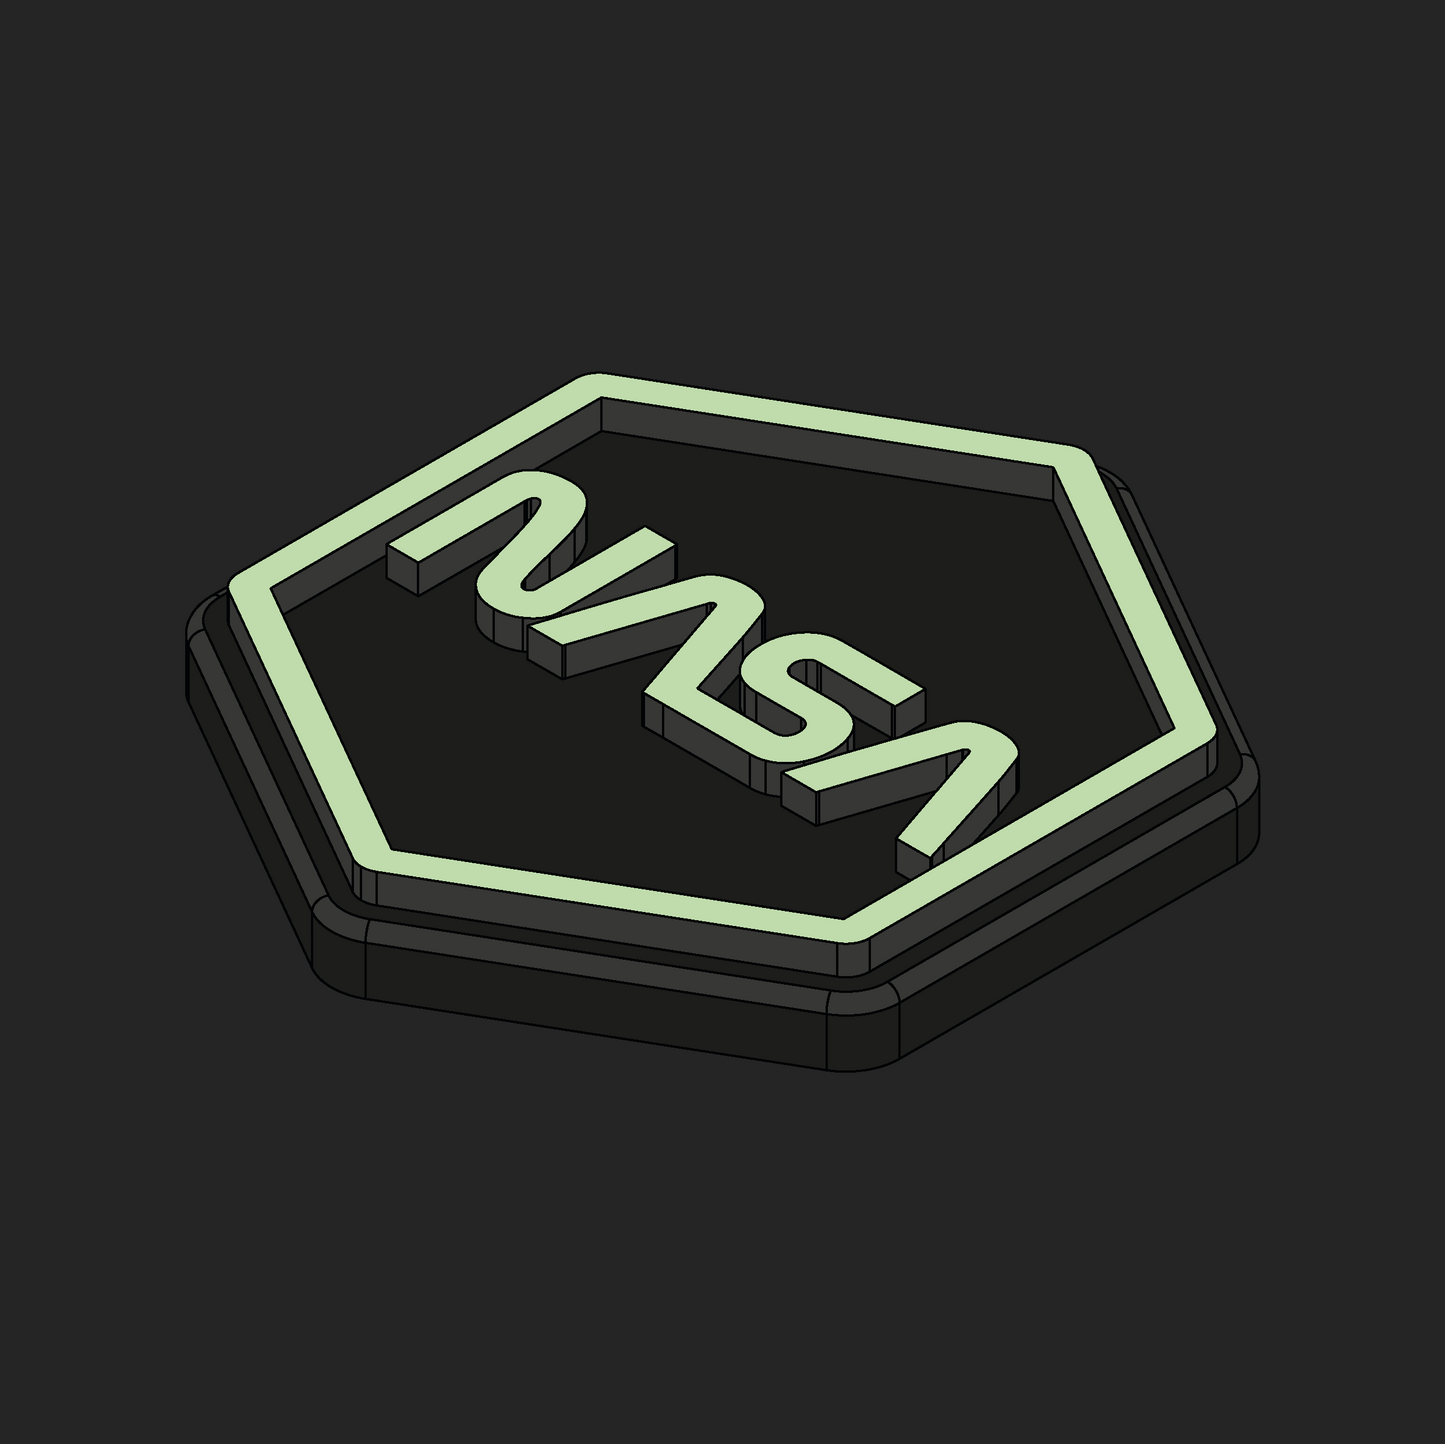 NASA Glow Velcro Patches - Hexapatch